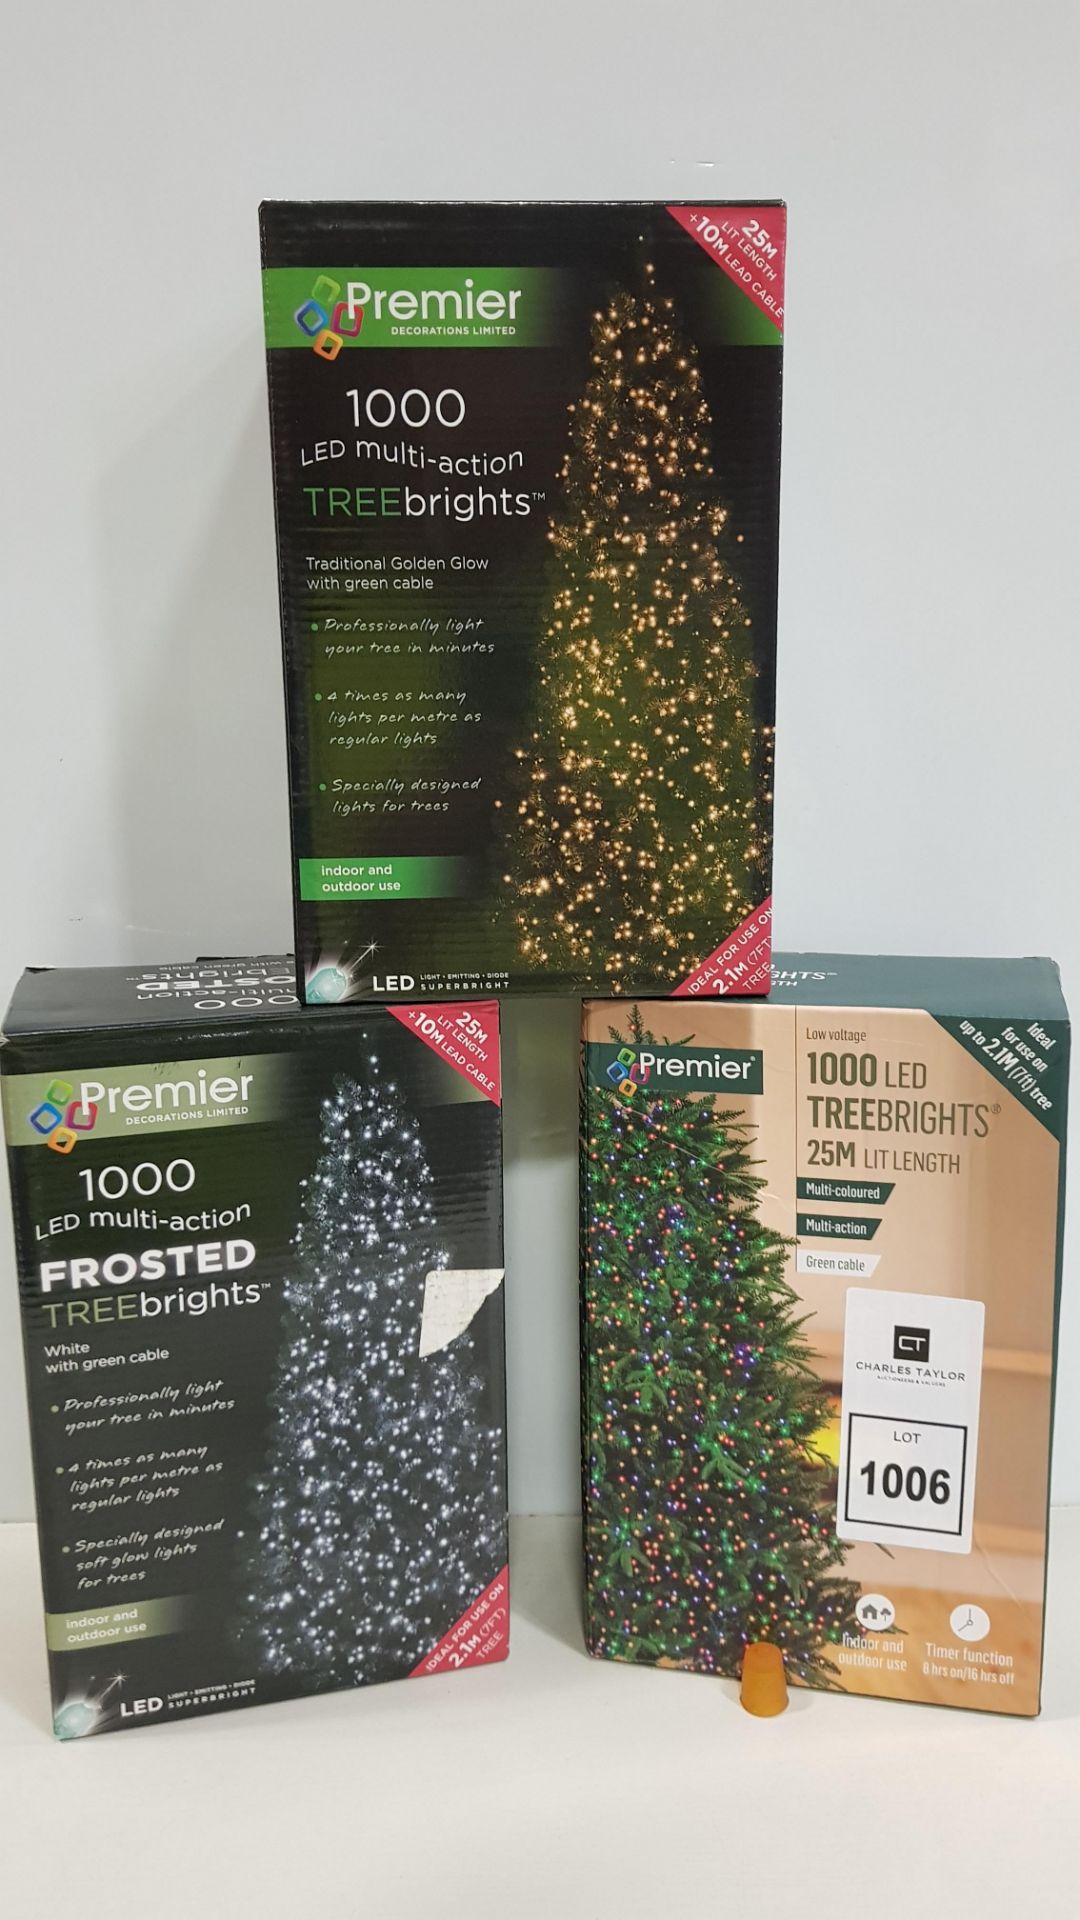 5 X BRAND NEW PREMIER 1000 LED TREEBRIGHTS - 25M LIT LENGTH FOR INDOOR/OUTDOOR USE AND WITH TIMER